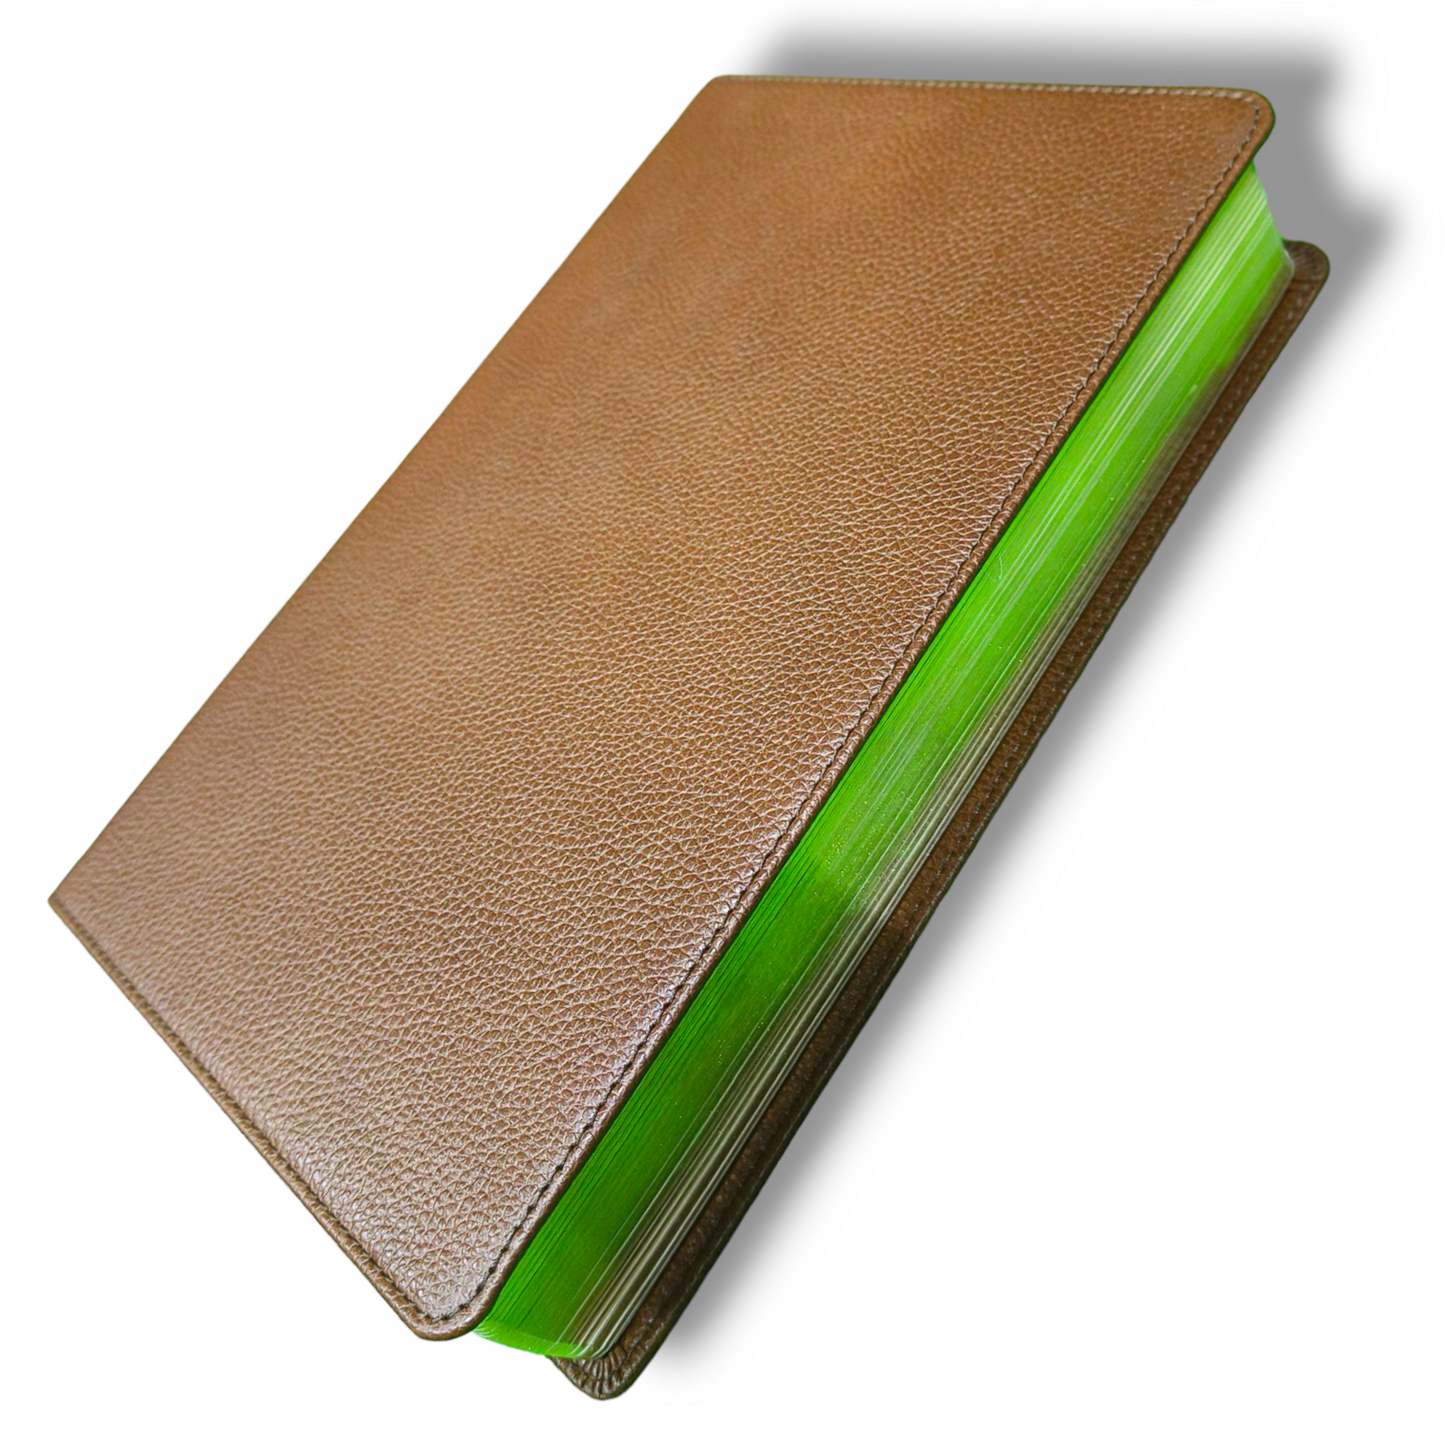 Maxwell Leadership Study Bible | New Edition | Brown Leather Imitation Cover